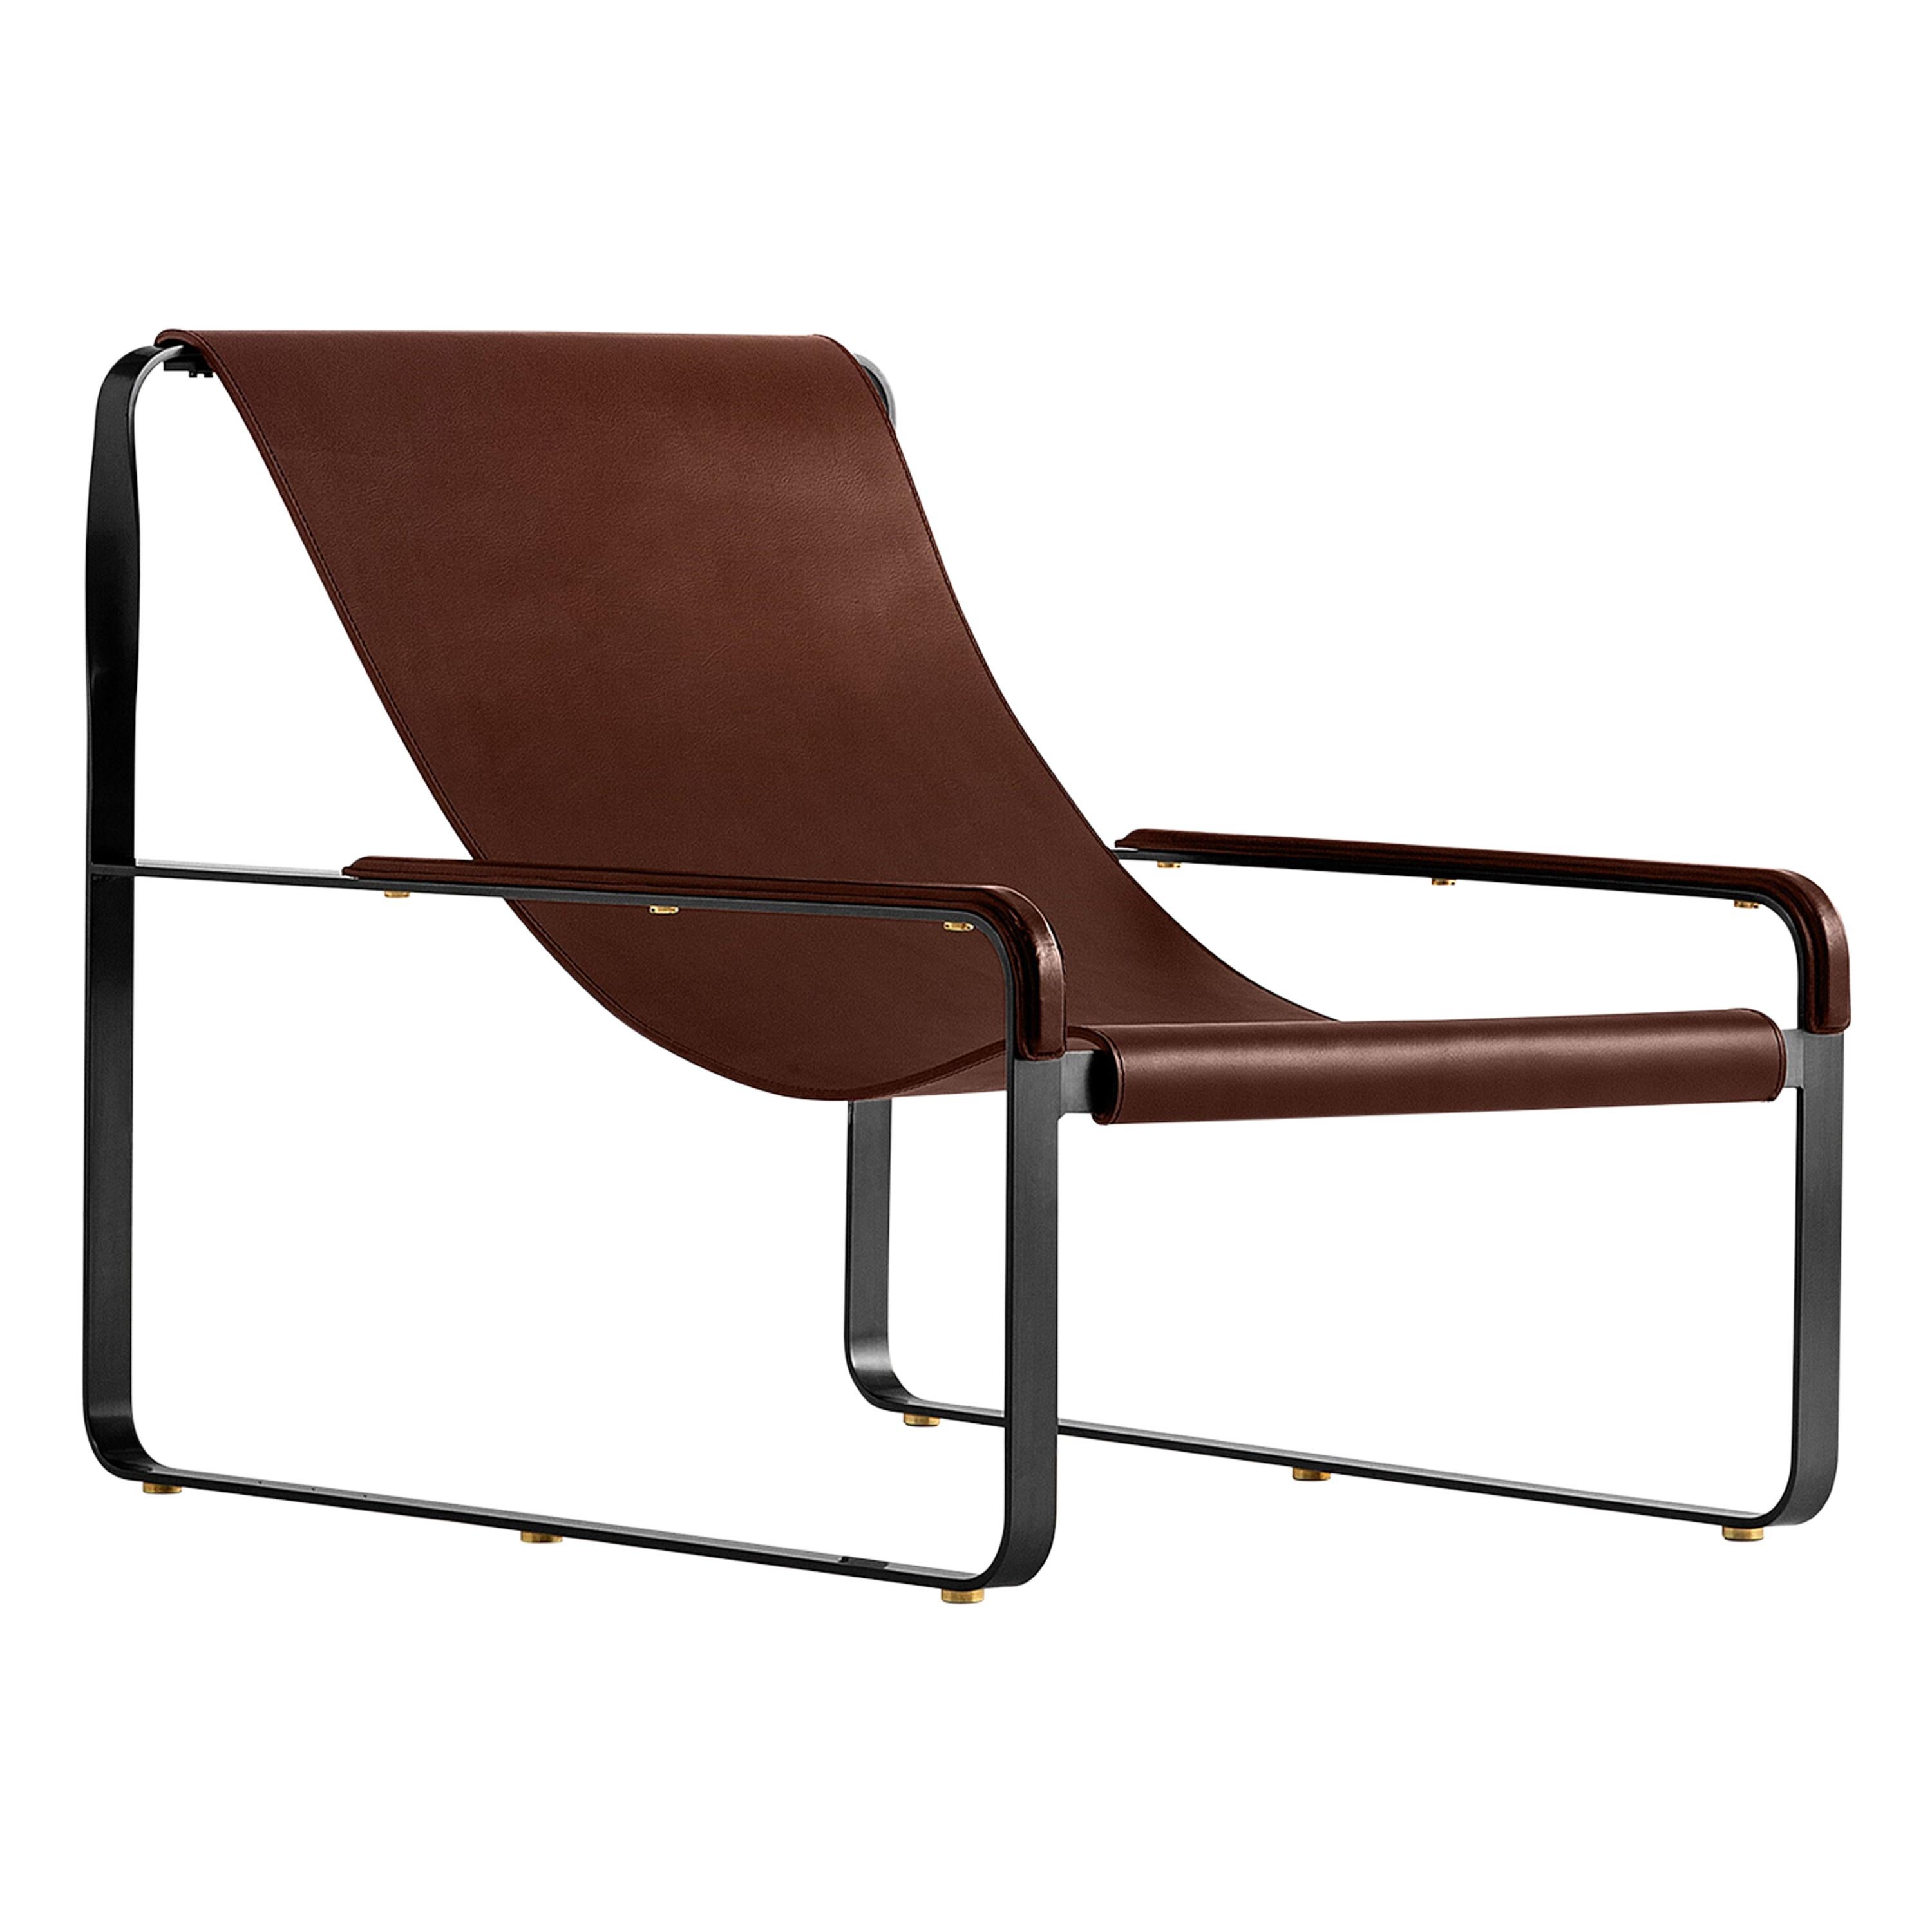 Classic Contemporary Chaise Lounge Black Smoke Metal & Dark Brown Leather